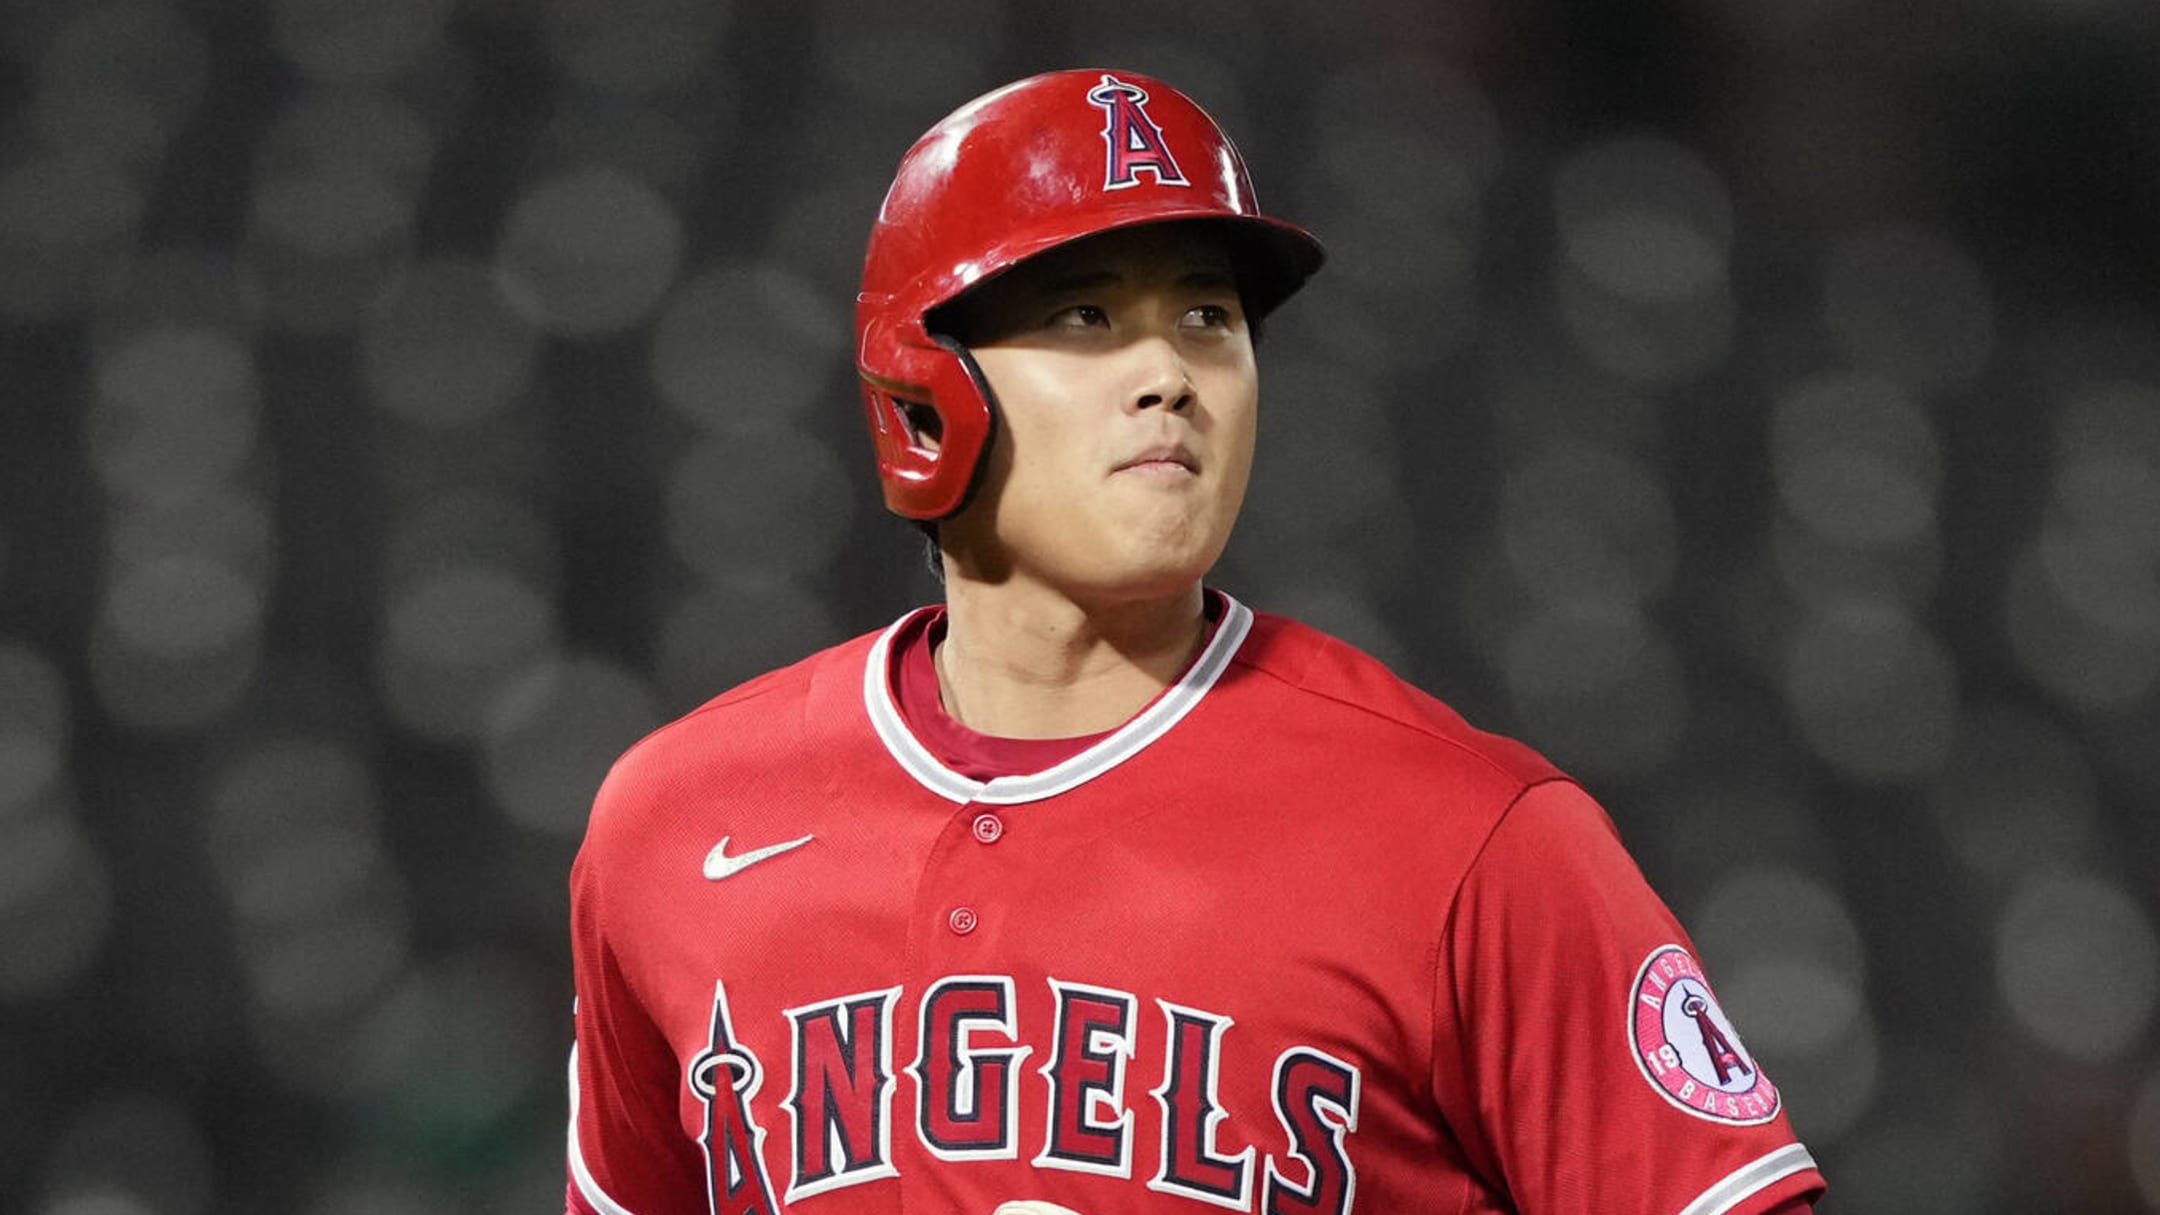 Shohei Ohtani Projects As AL MVP On Strength Of His Bat Alone